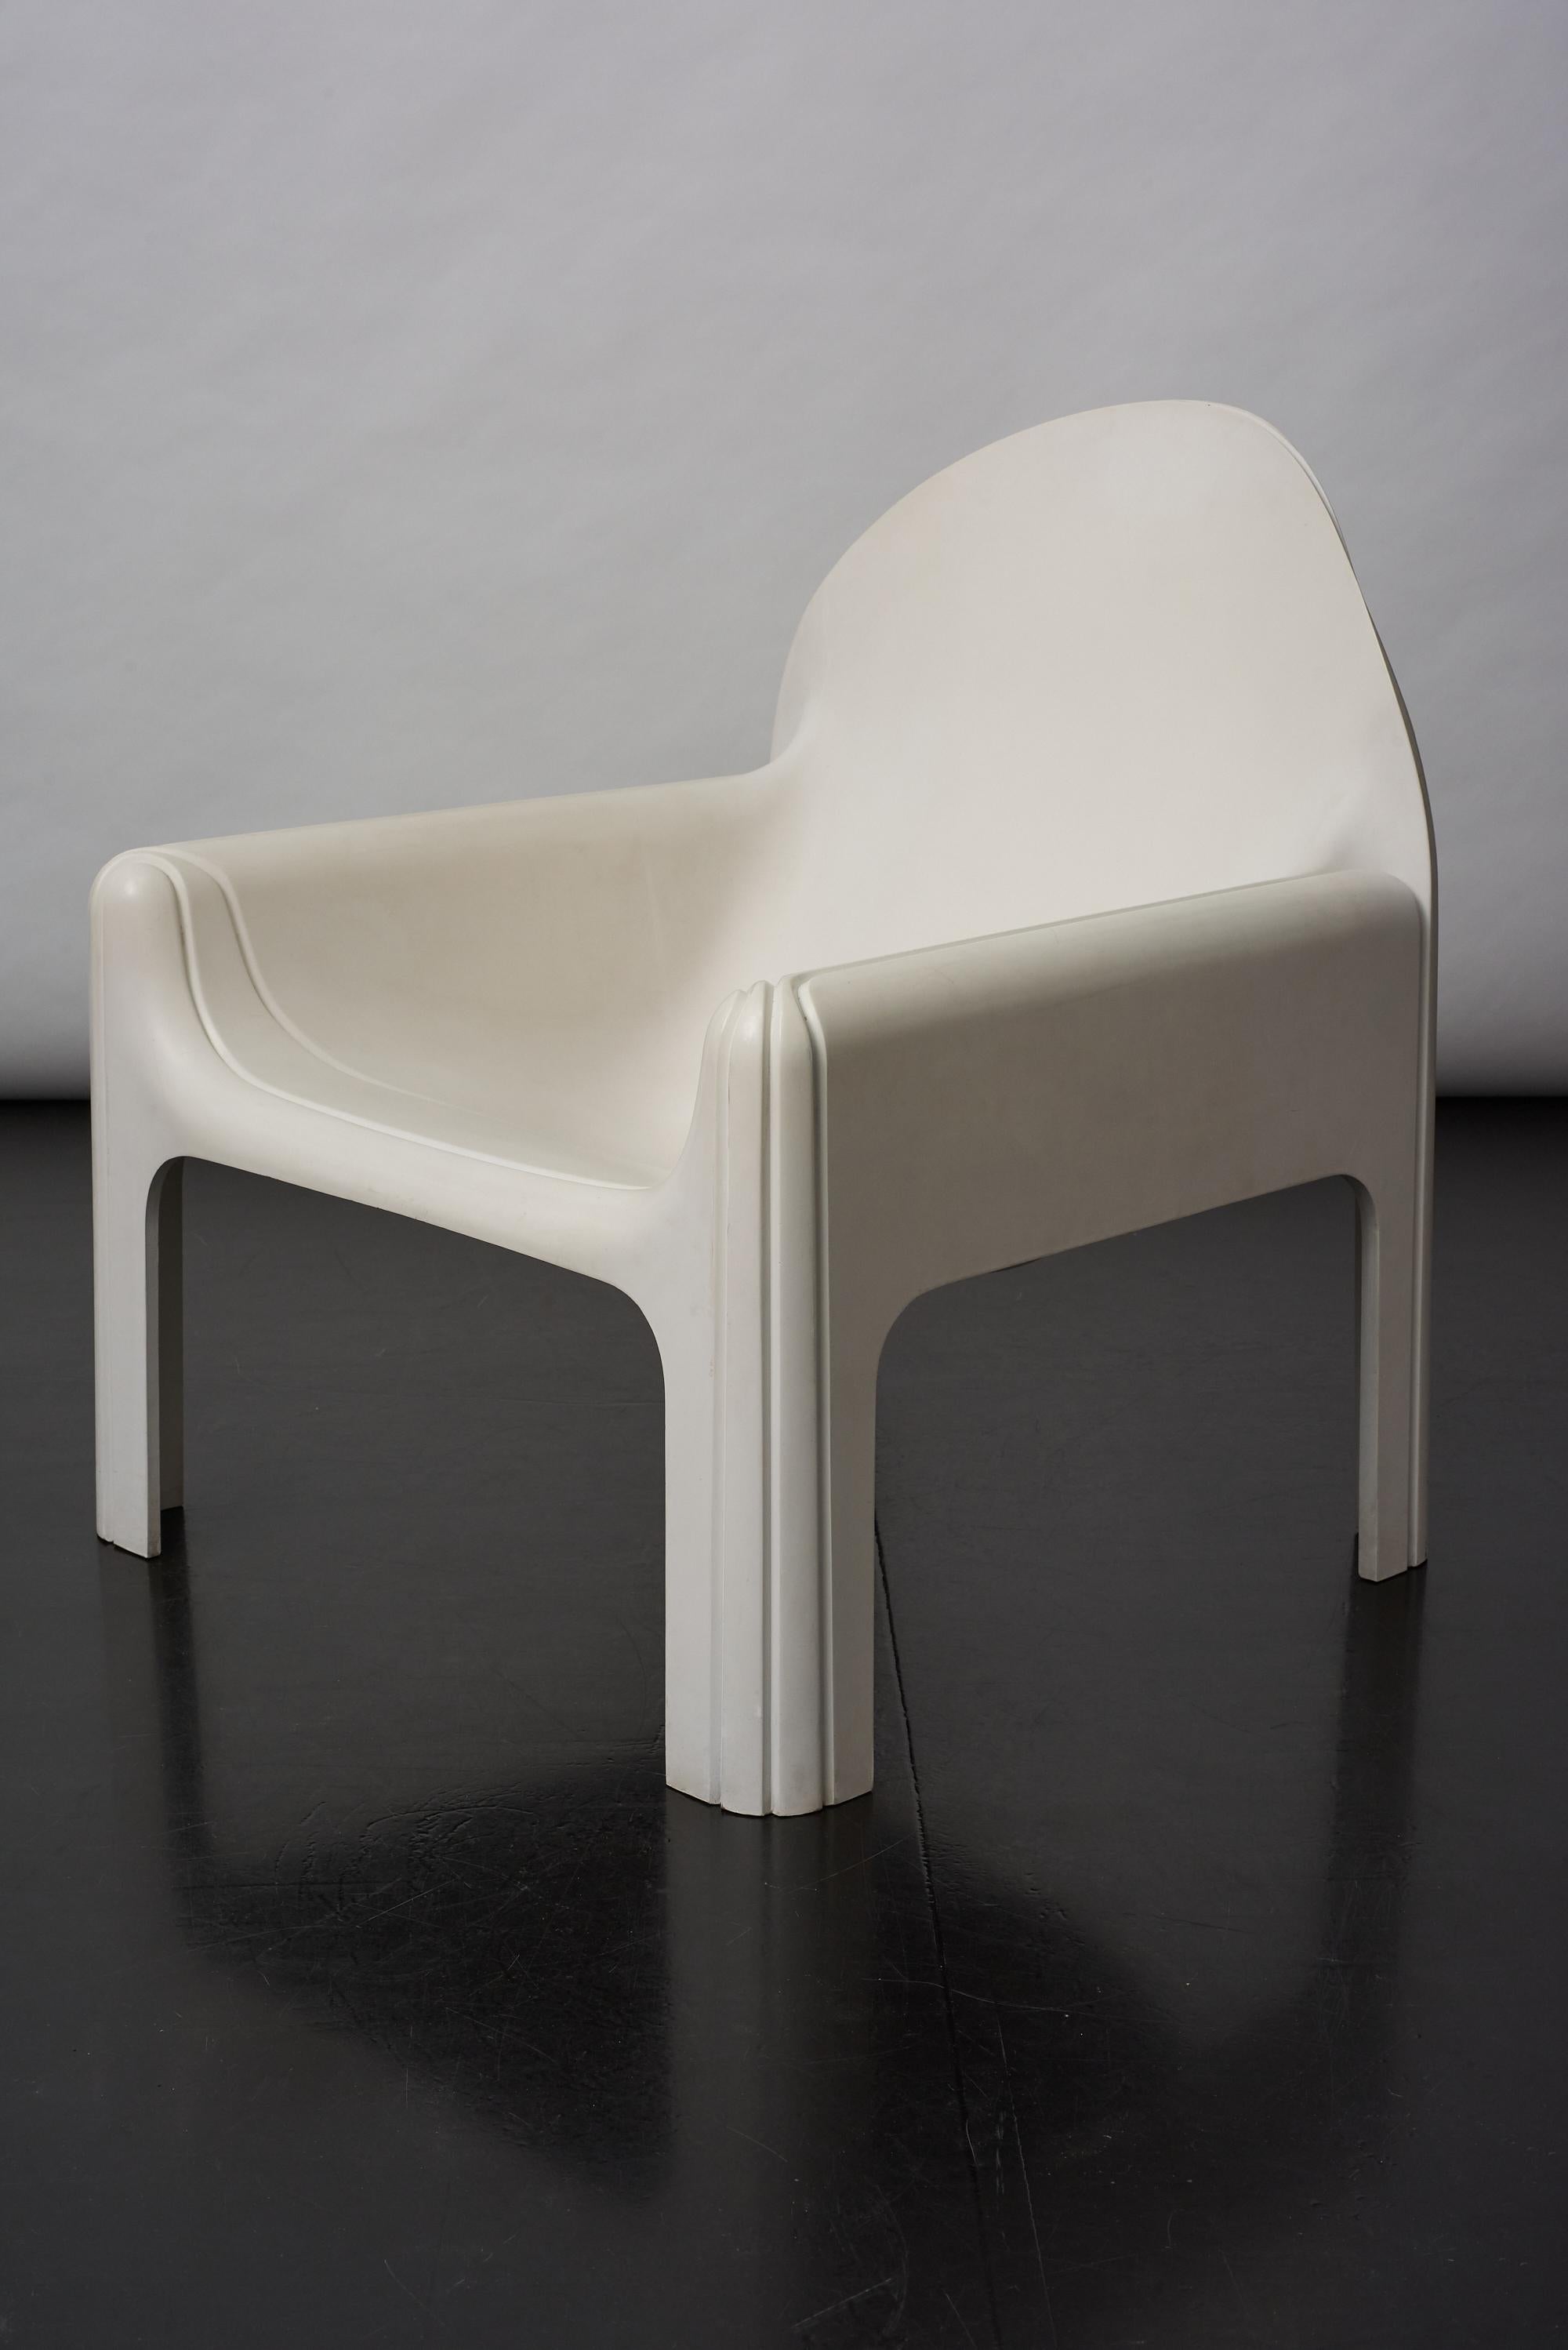 Lounge chair 4794 by Gae Aulenti for Kartell, 1974.
Molded white polyurethane.
This striking design won the Compasso D'oro industrial design award in 1974.